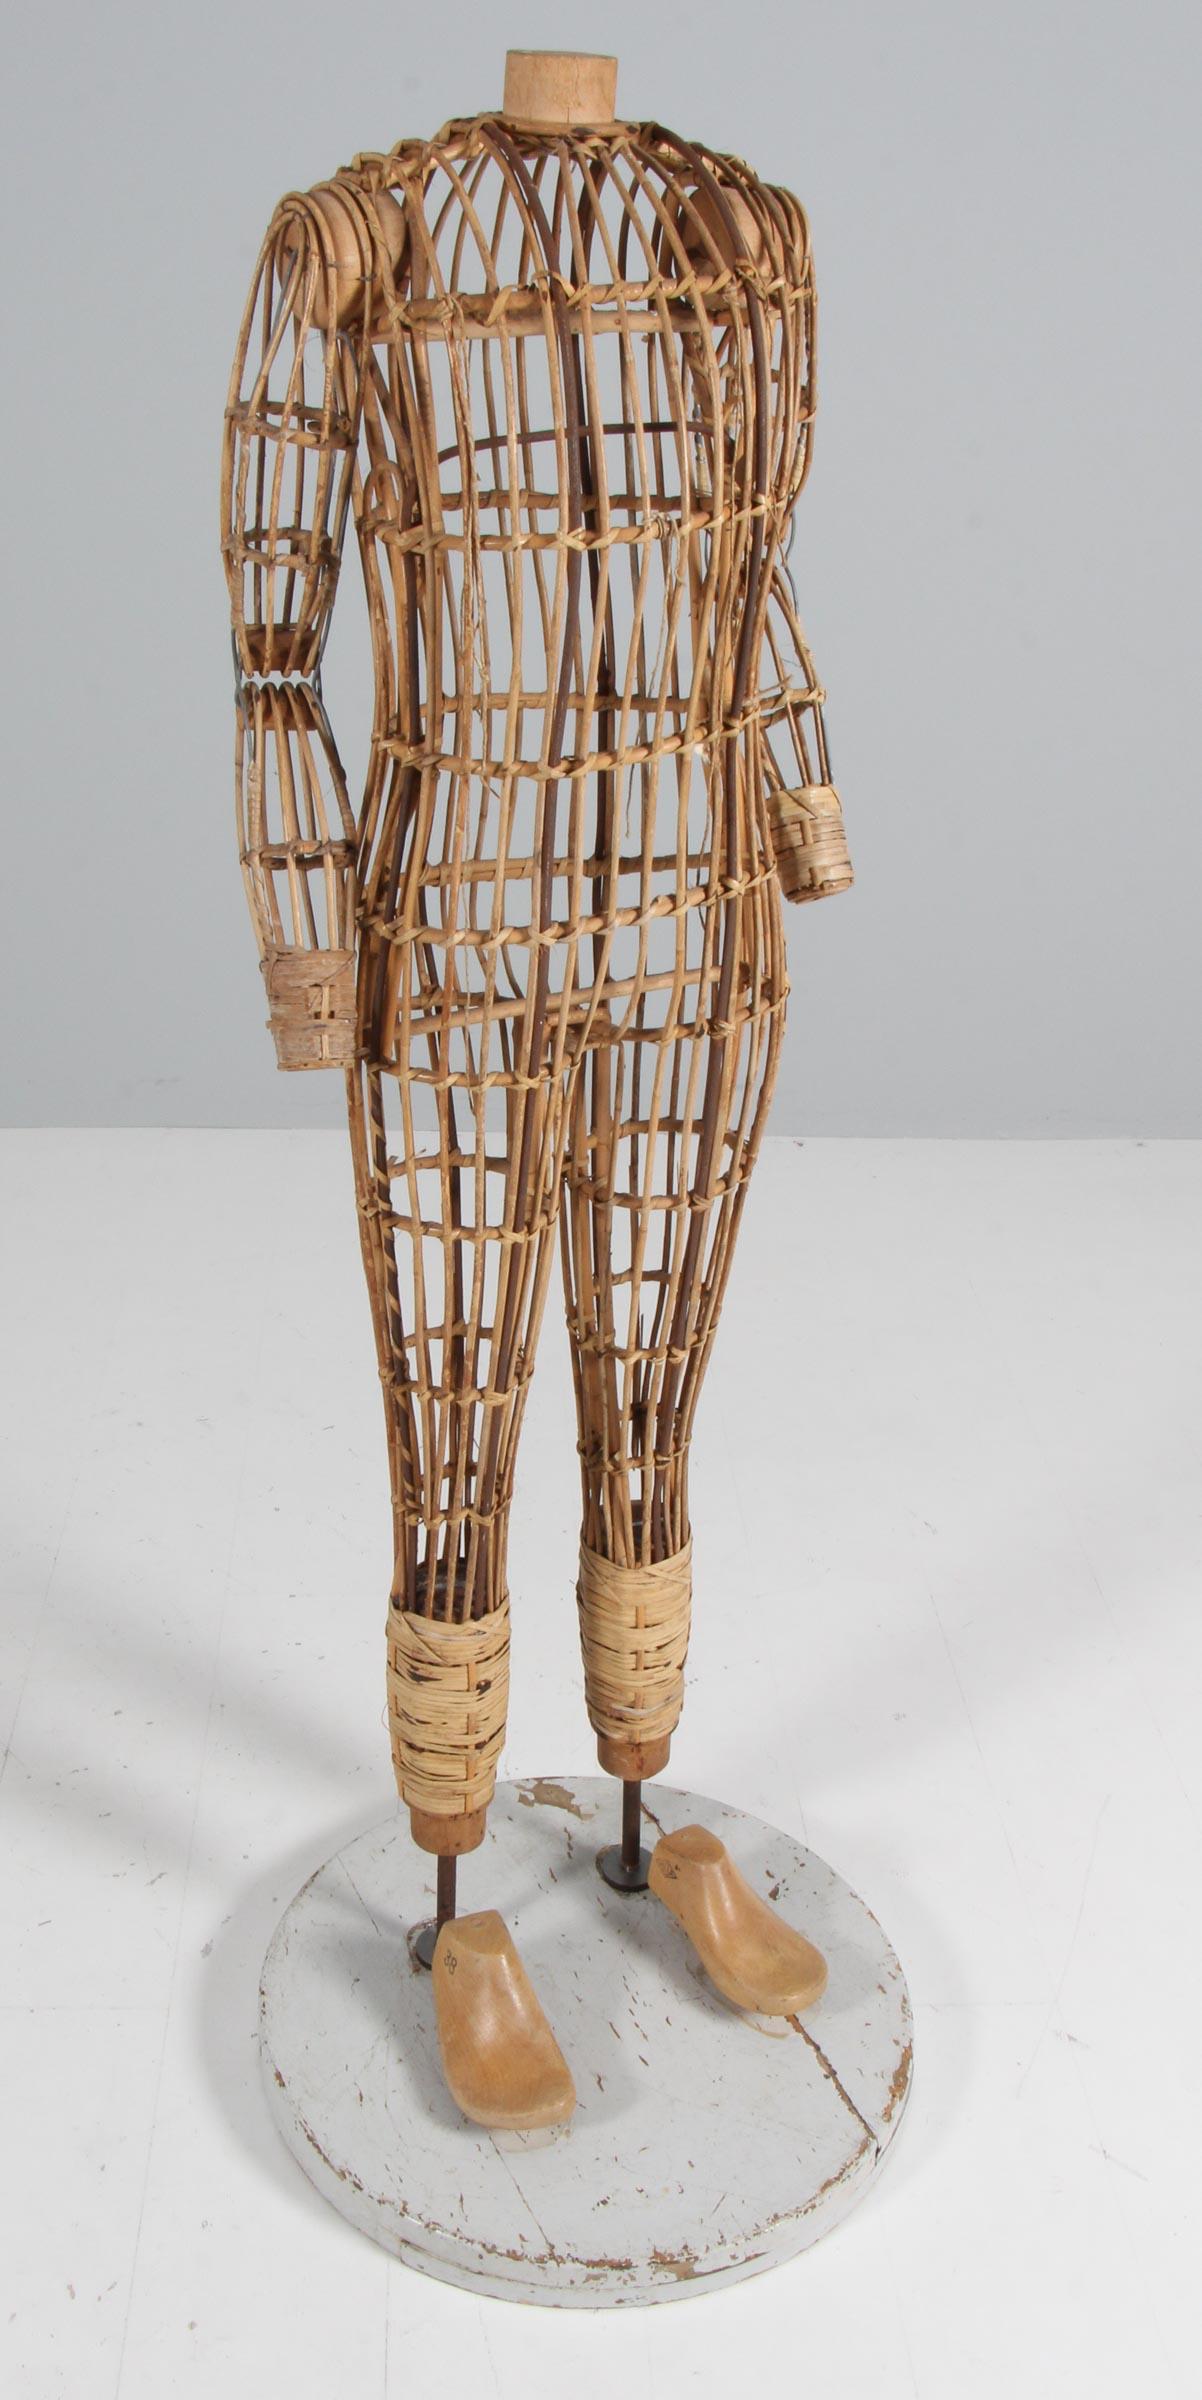 Antique Mannequin made of woven bamboo and cane. Steel frame. Base of solid wood. Later shoe holders mounted.

Fantastic decorative, but still in perfect usable condition.